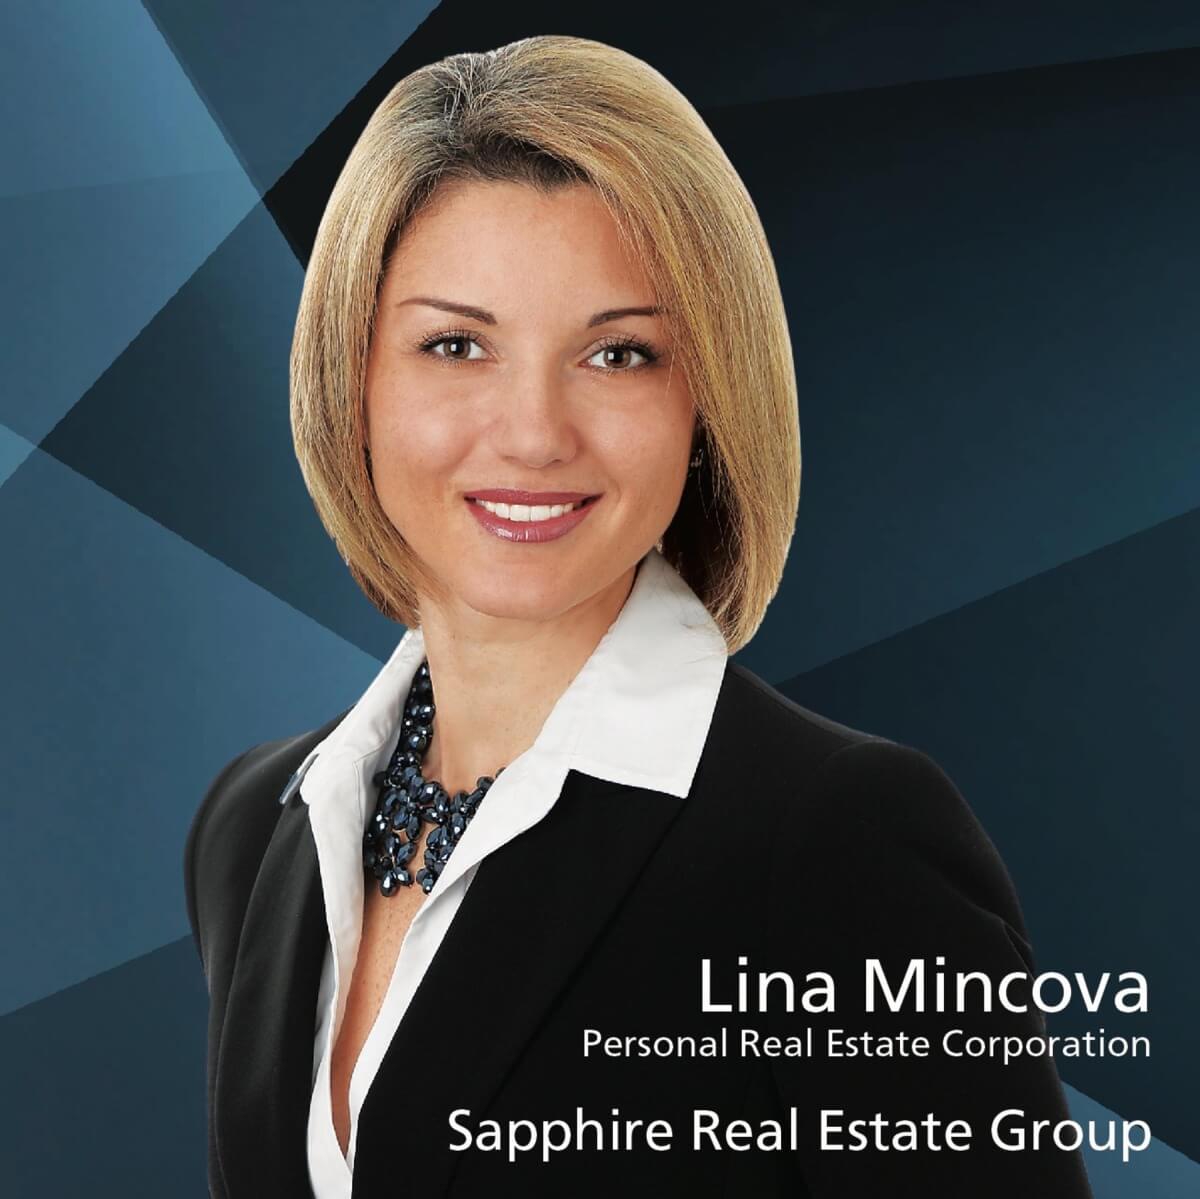 Sapphire Real Estate Group